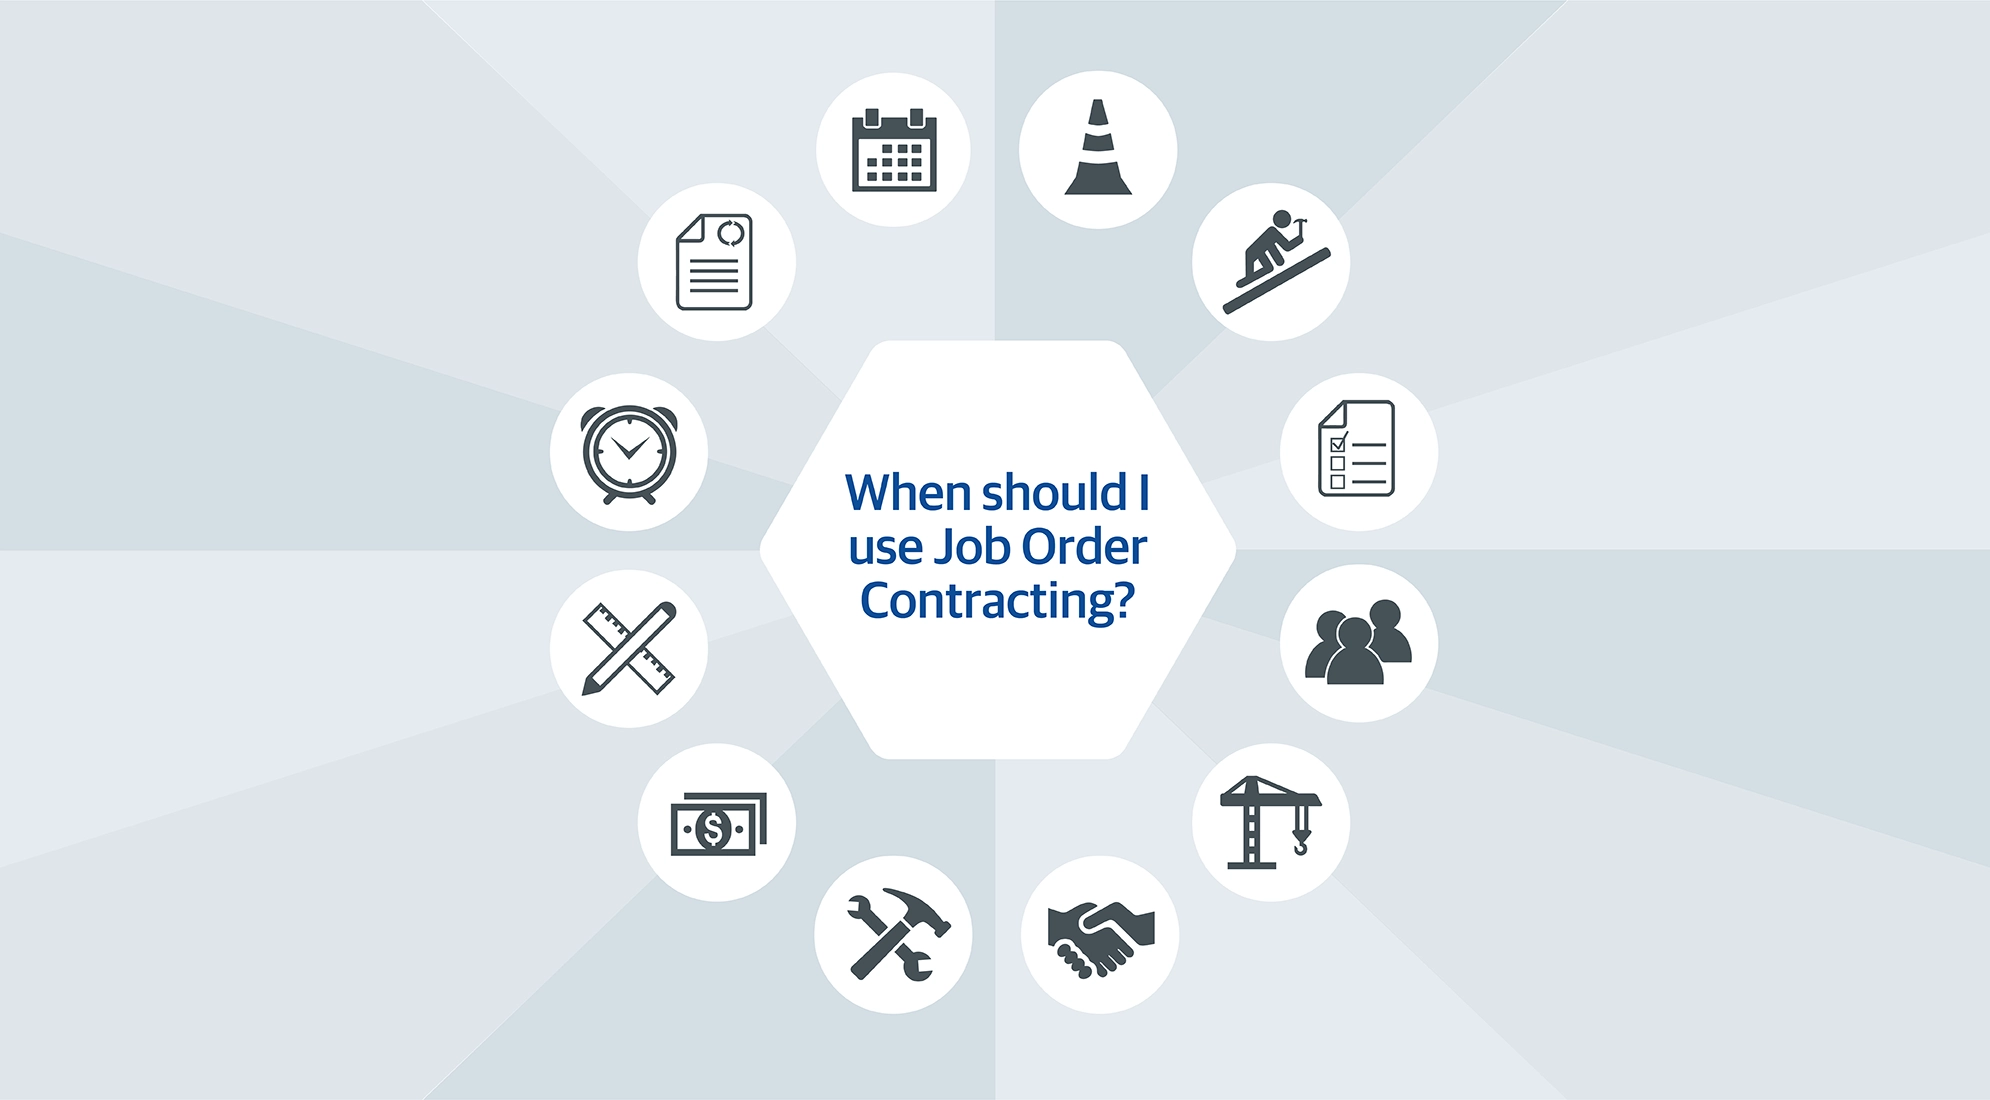 When to Use Job Order Contracting